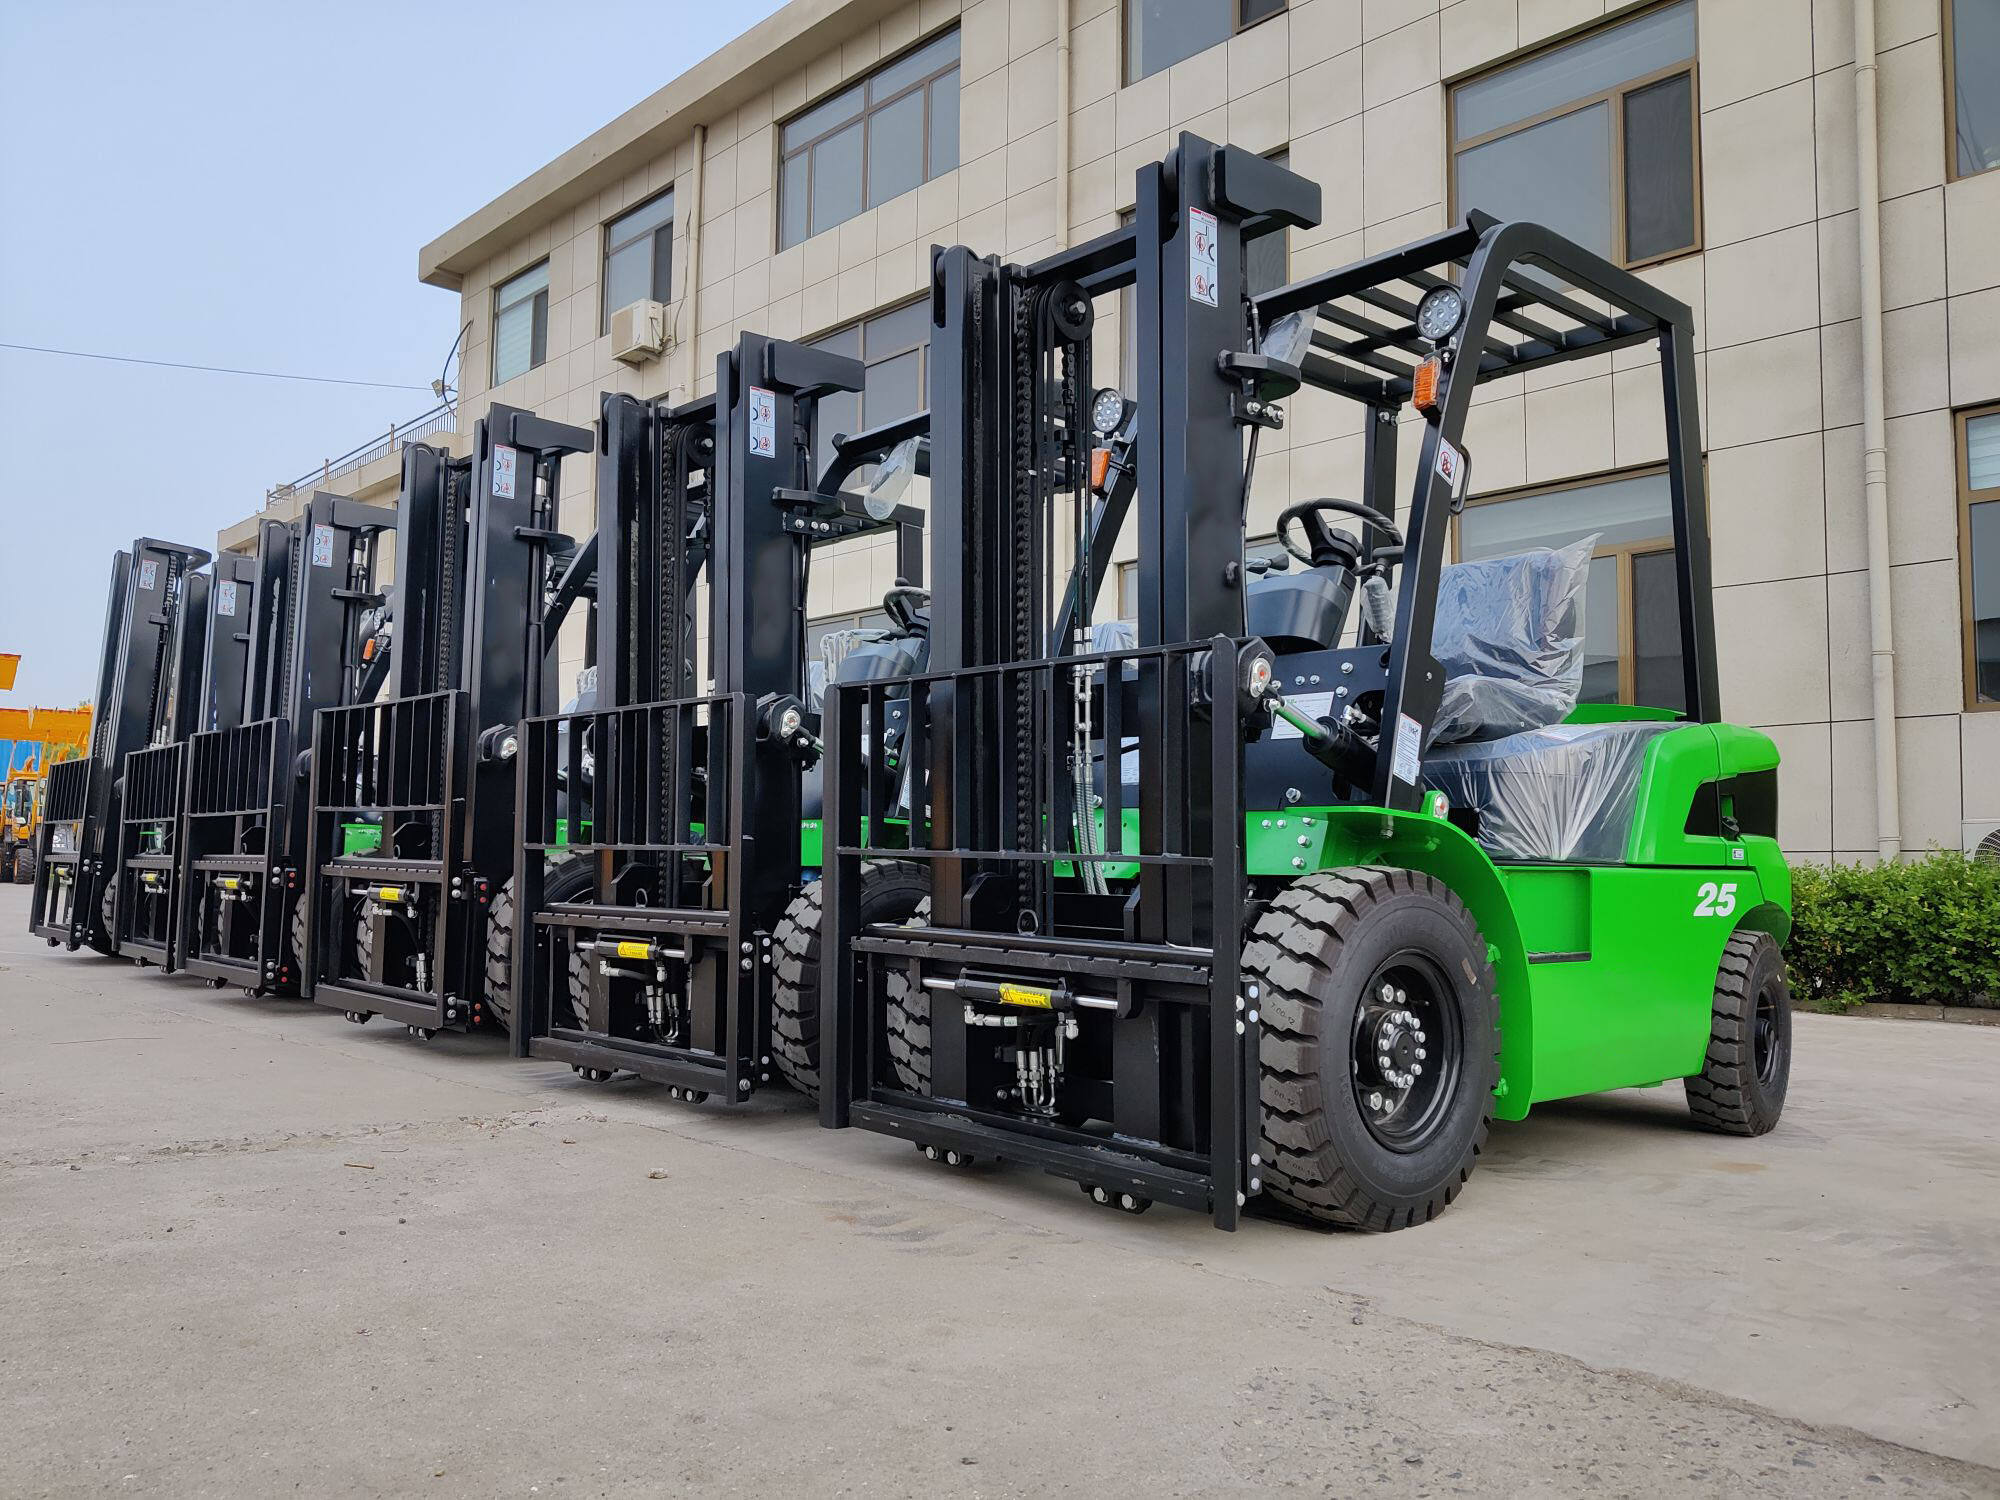 A new batch of diesel forklifts is about to be shipped to Europe.